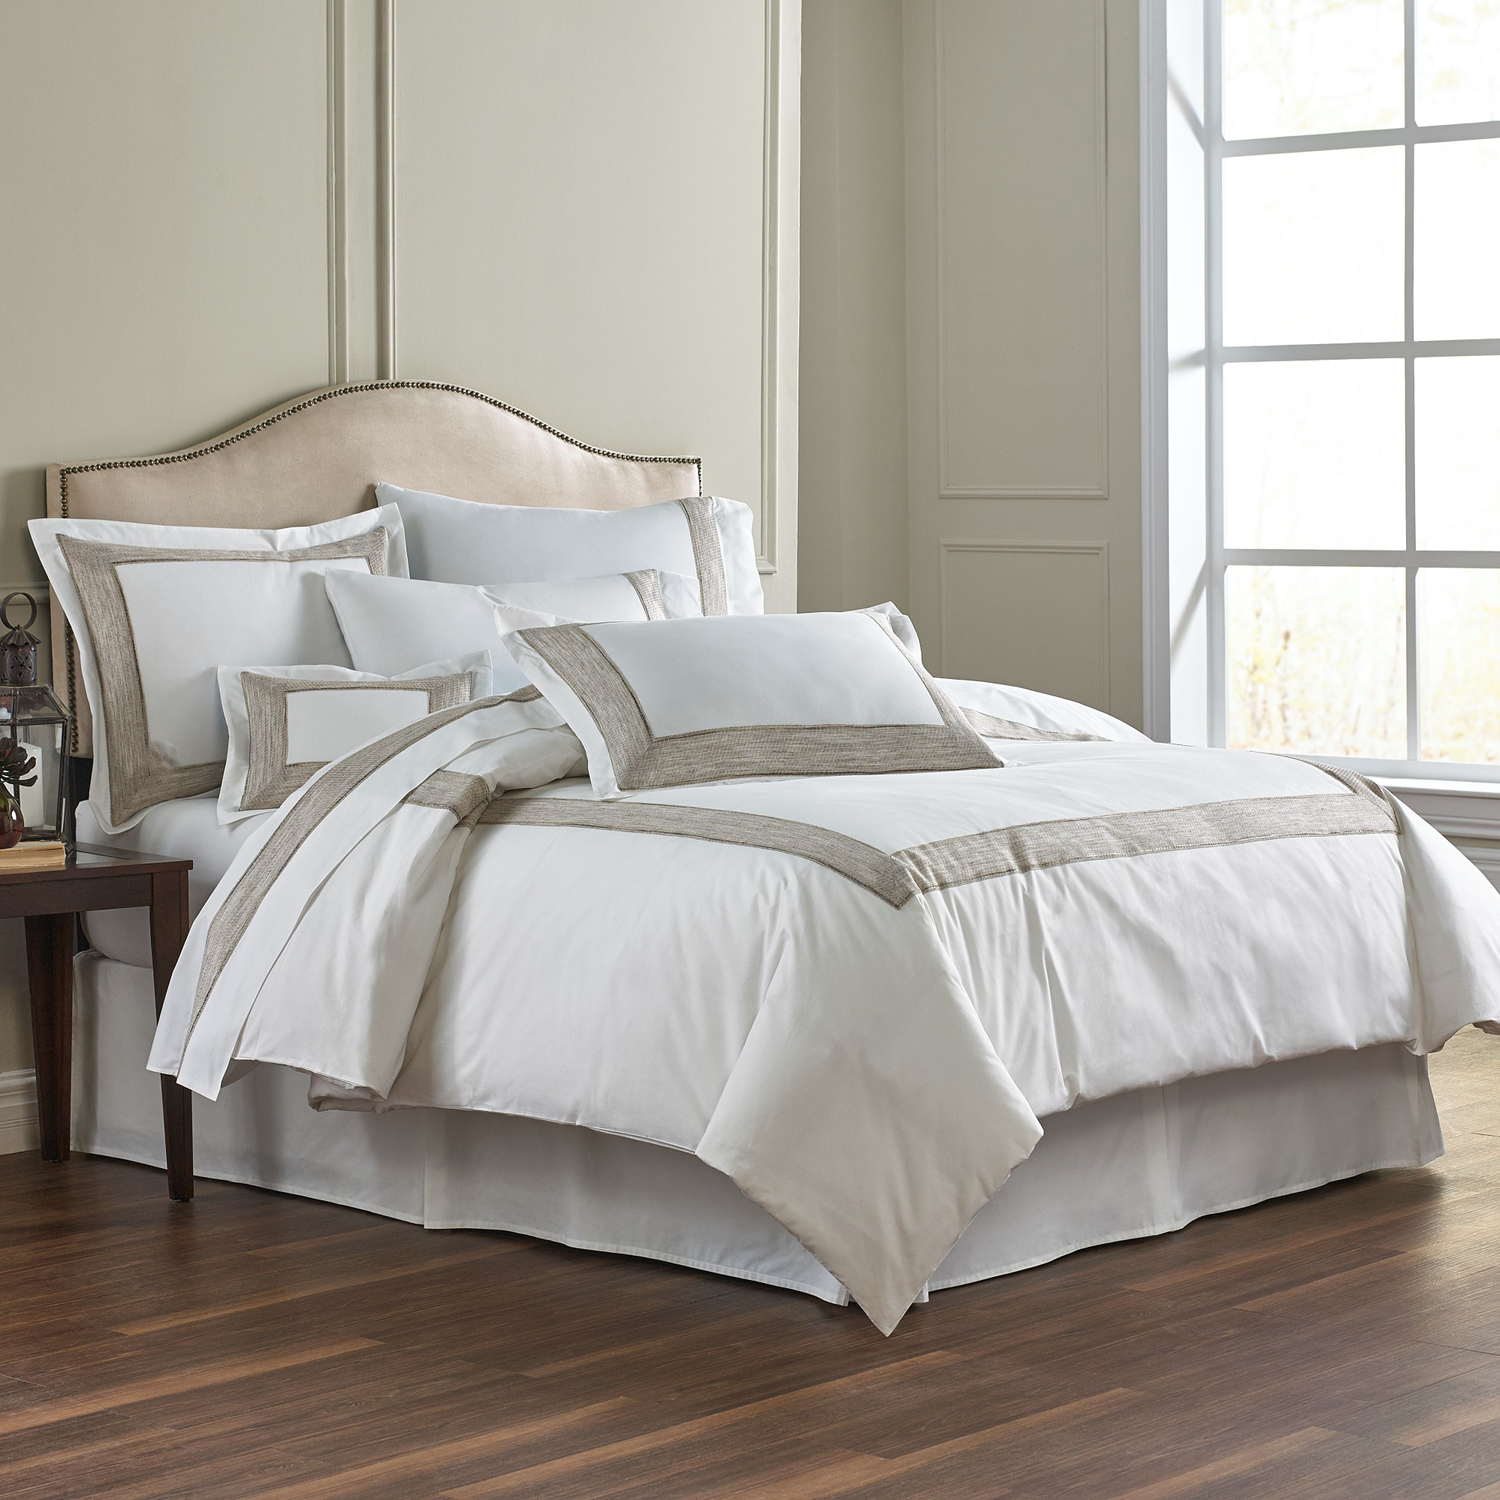 *Traditions Linens Bedding Cassia Collection